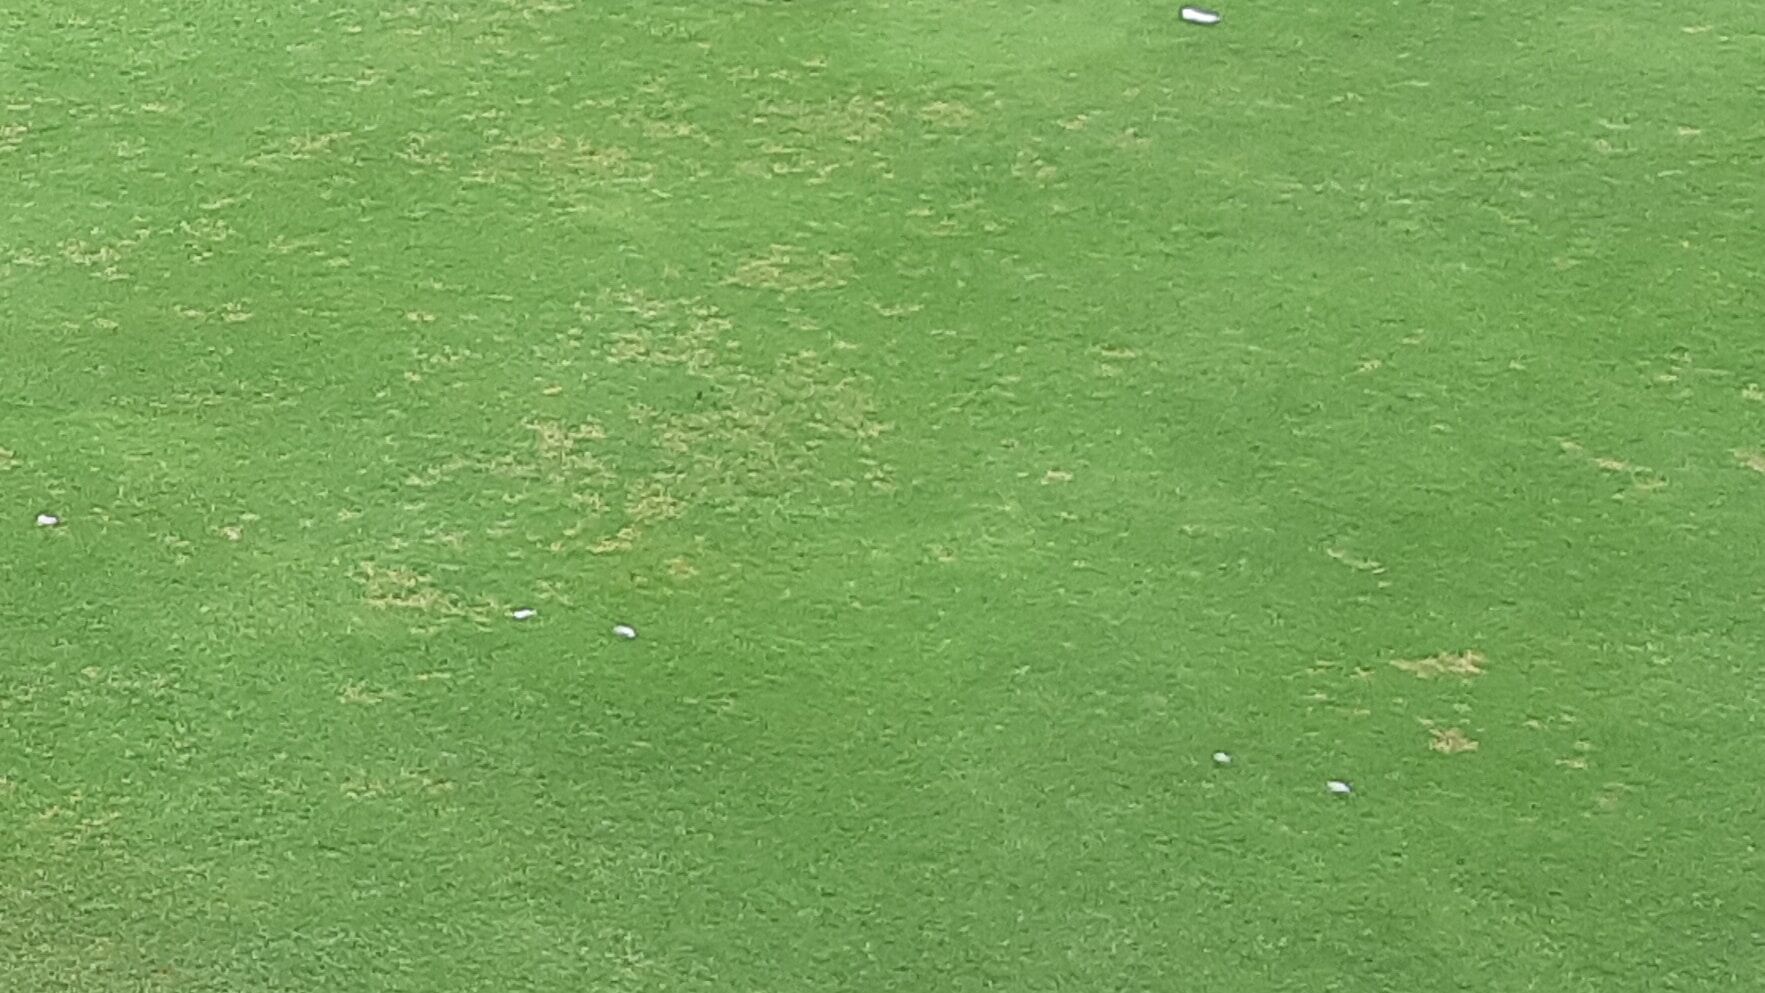 Dollar spot patches on lawn